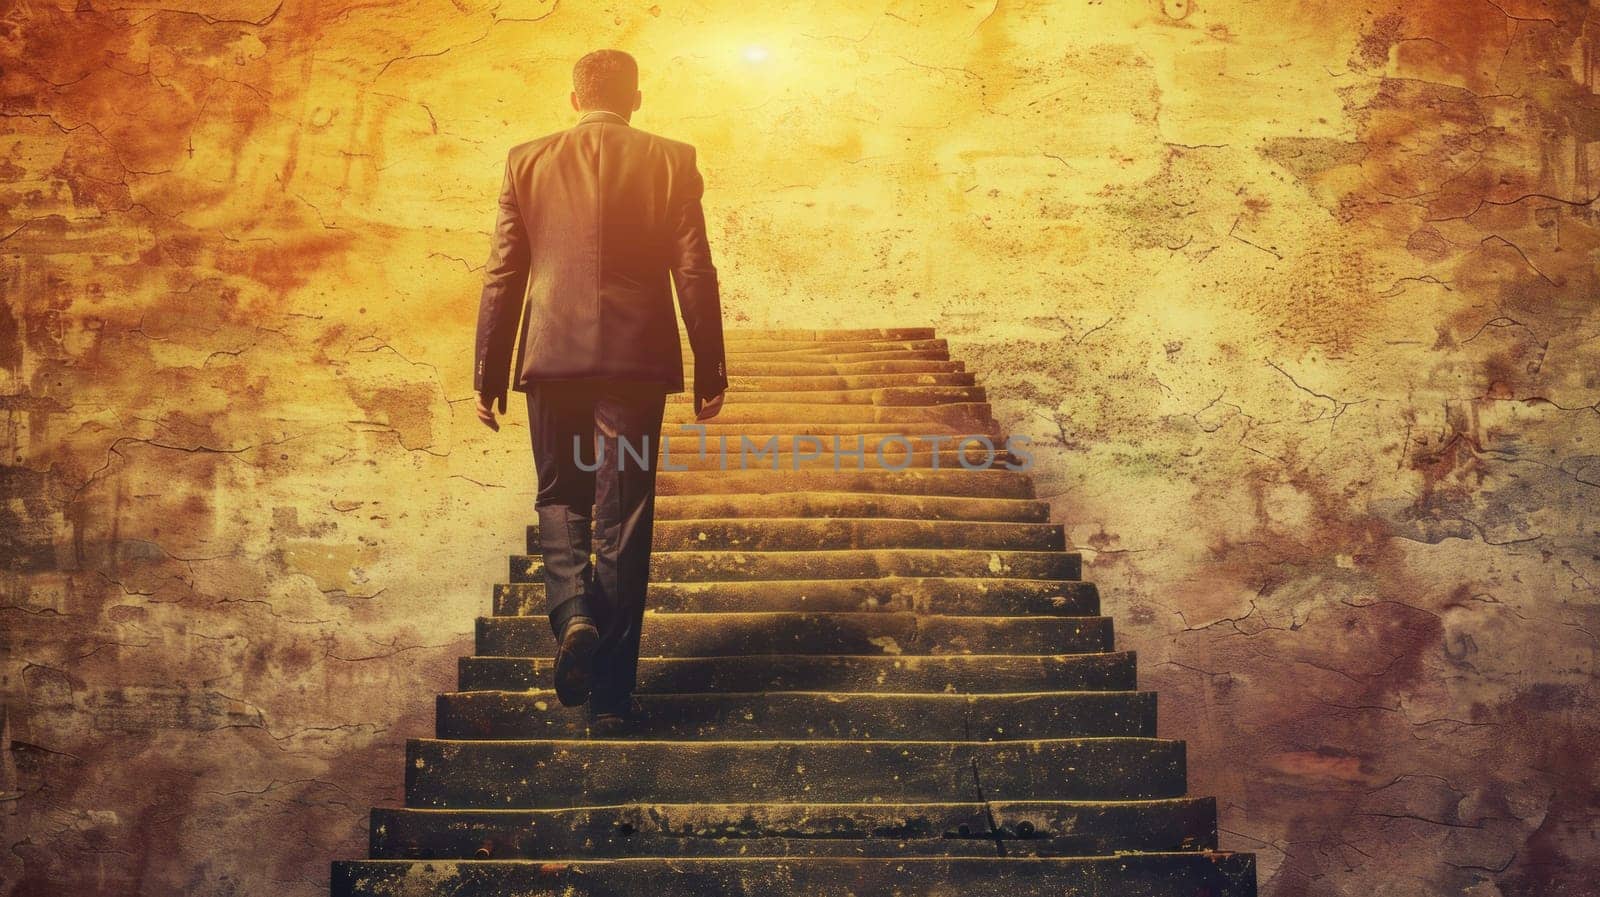 A man is walking up a set of stairs. The image has a sense of determination and purpose, as the man is focused on reaching the top of the stairs